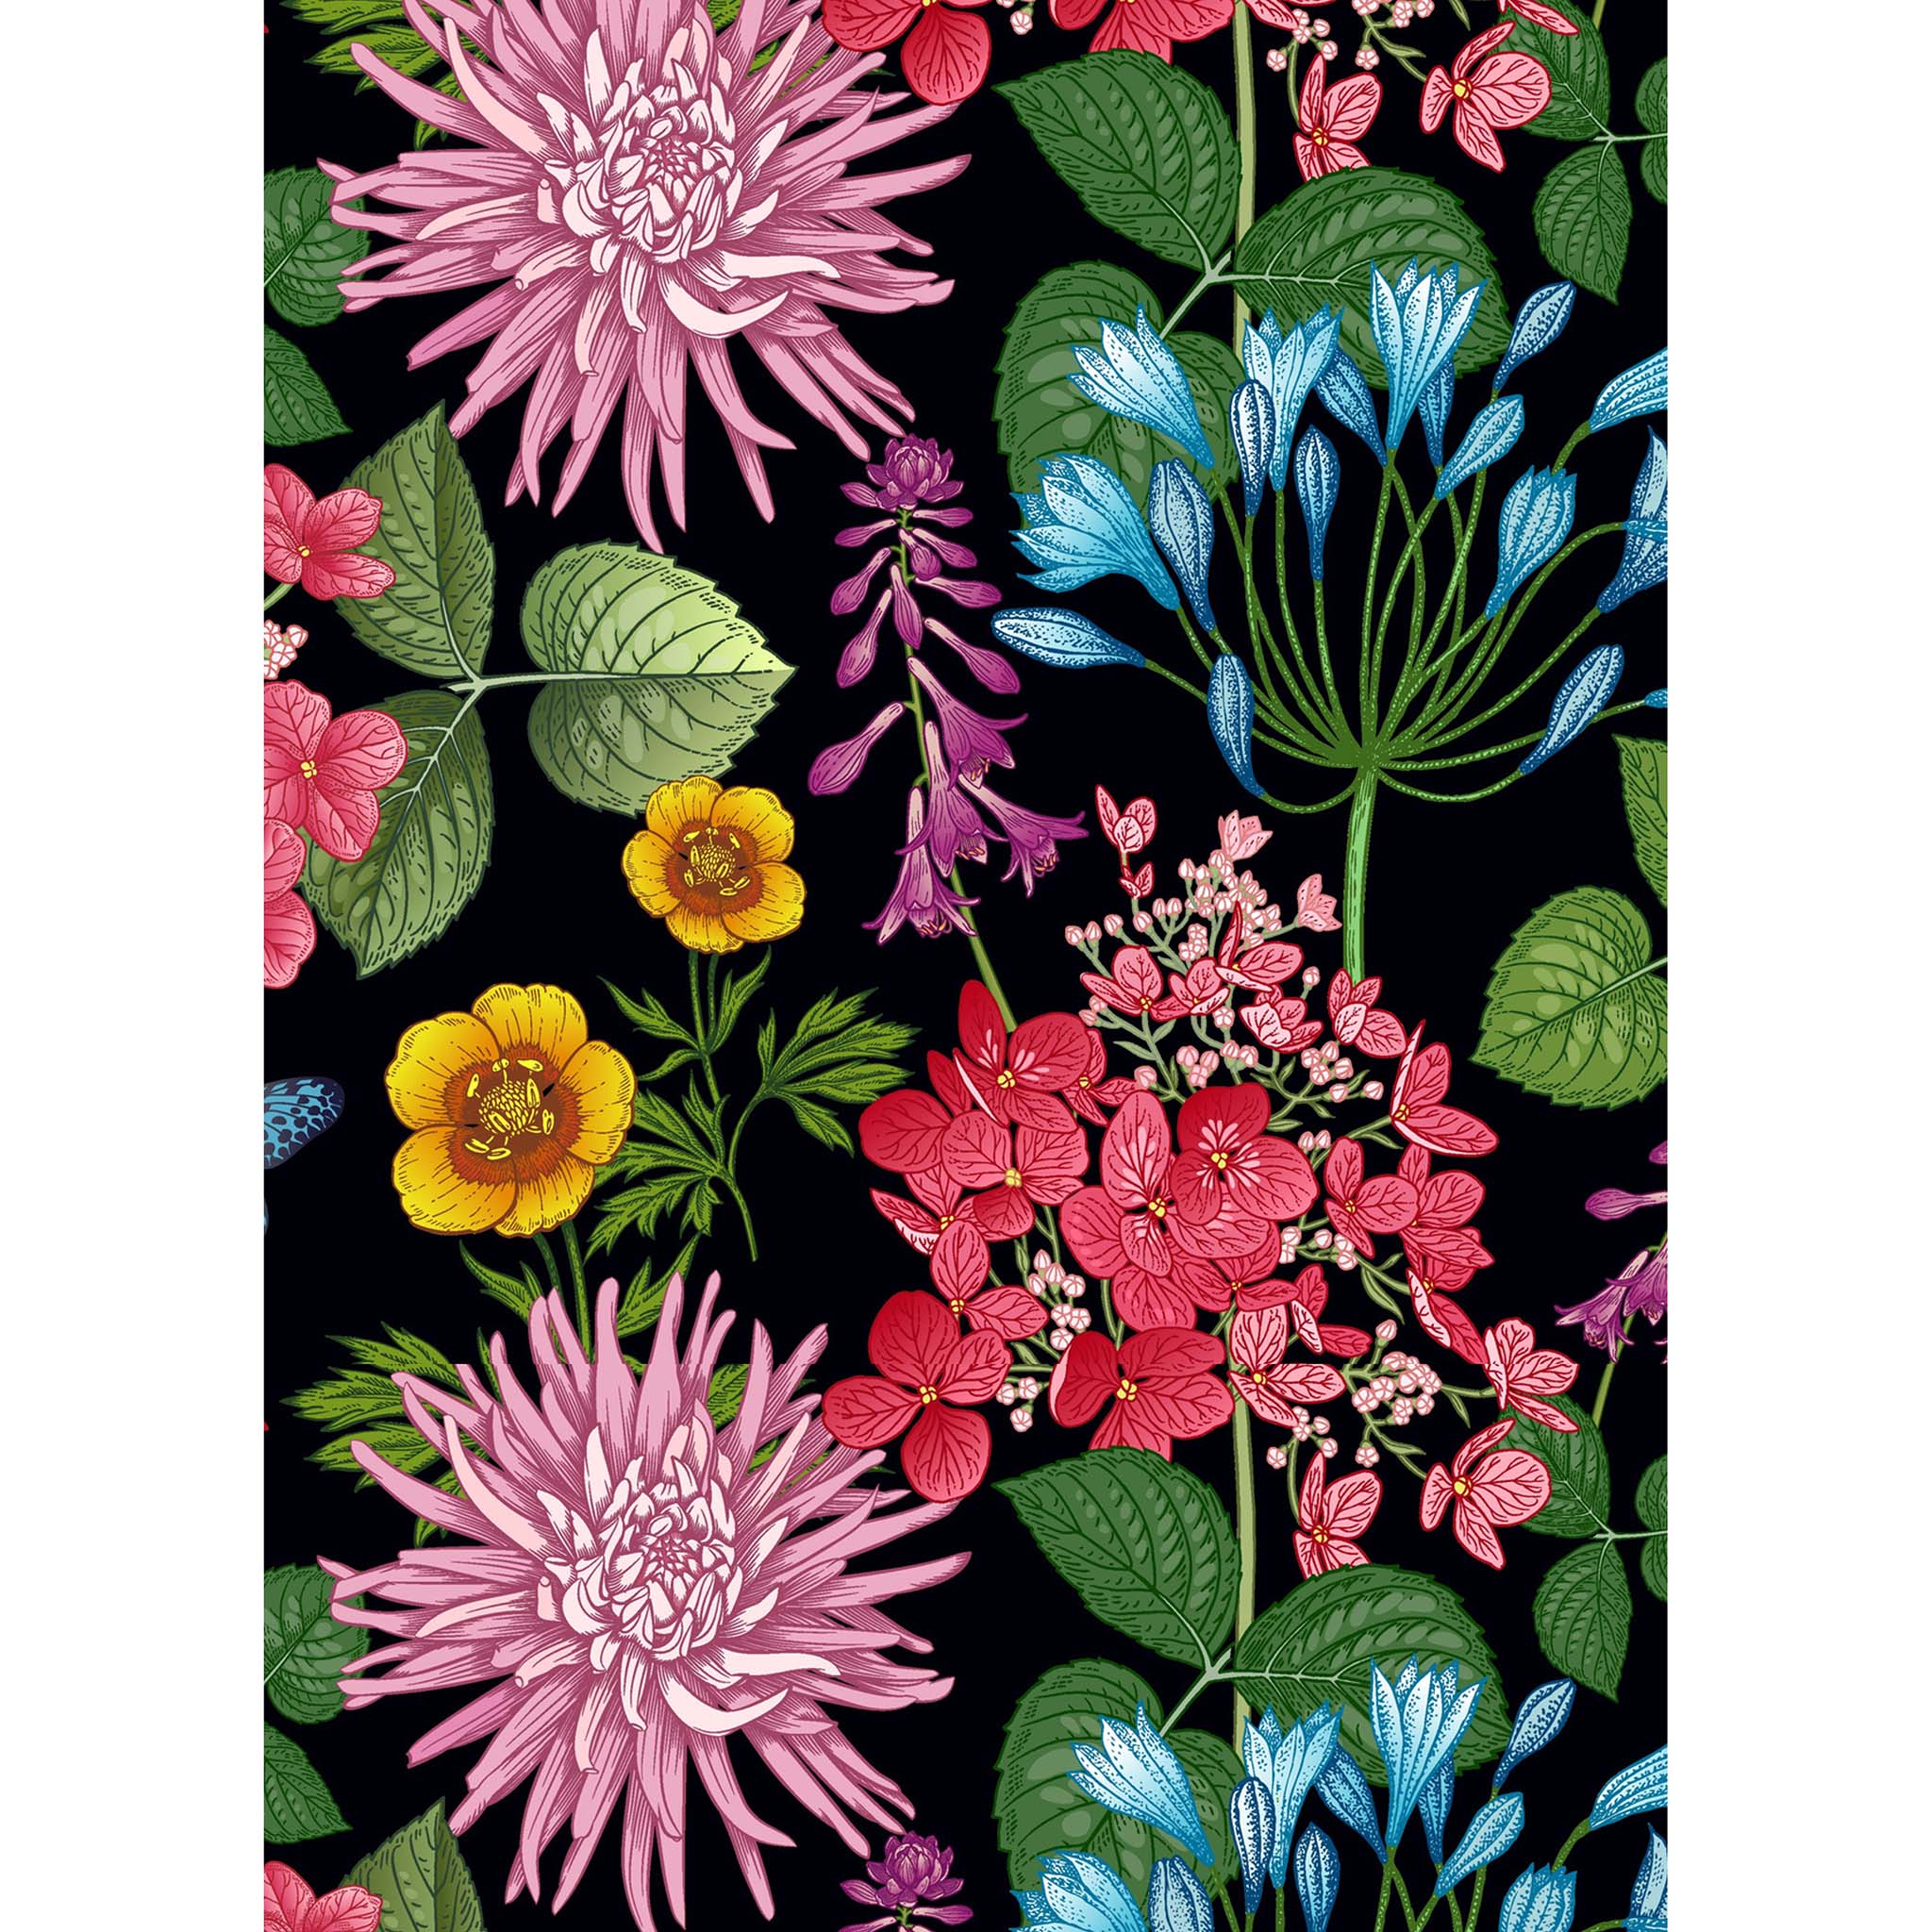 Tissue paper design that features a jet black background with bright colorful flowers and foliage. White borders are on the sides.